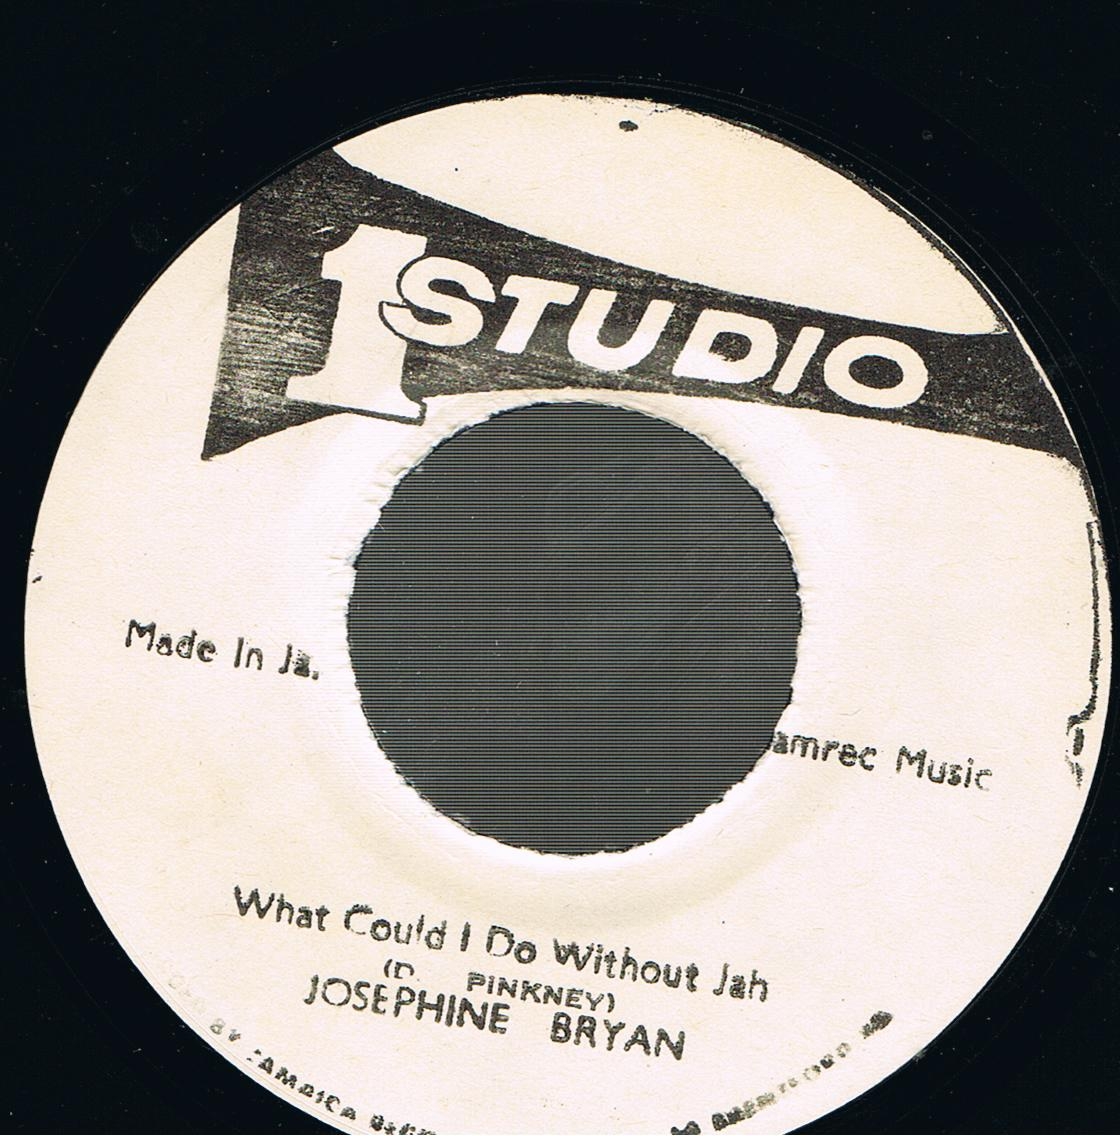 Josephine Bryan - What Could I Do Without Jah / Version (Original Stamper 7")